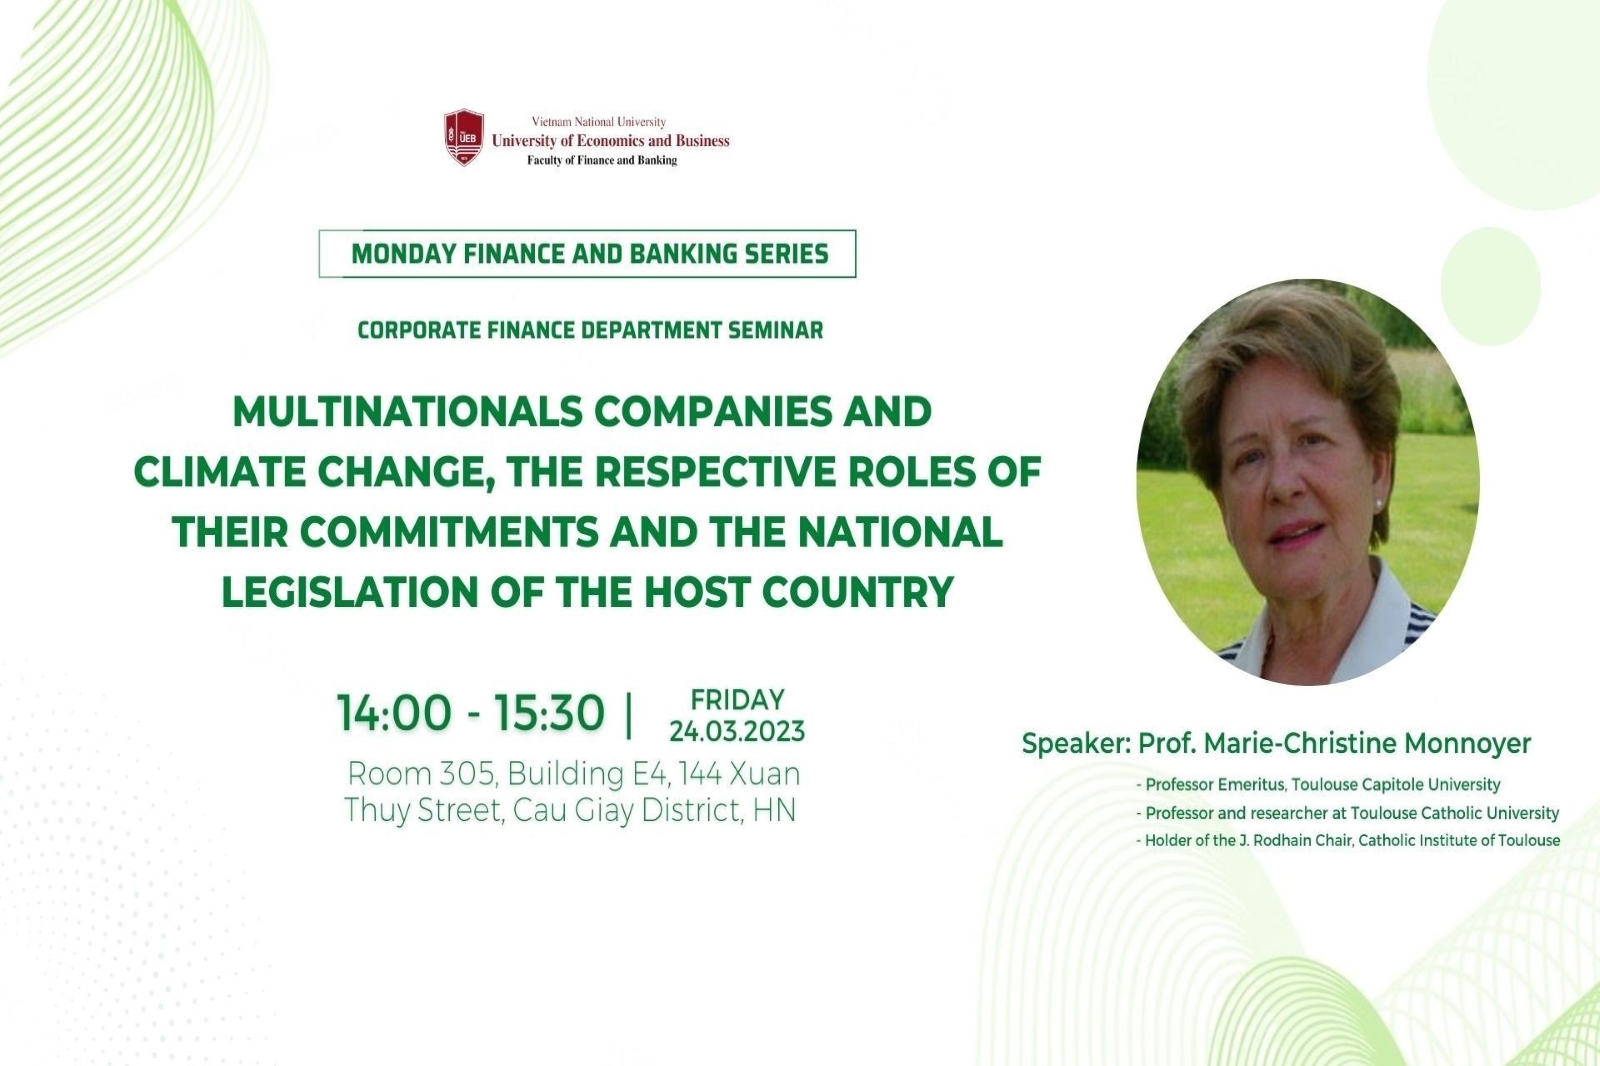 [RECAP] Monday Finance and Banking Seminar tháng 3/2023  với chủ đề "Multinationals companies and climate change, the respective roles of their commitments and the national legislation of the host country"